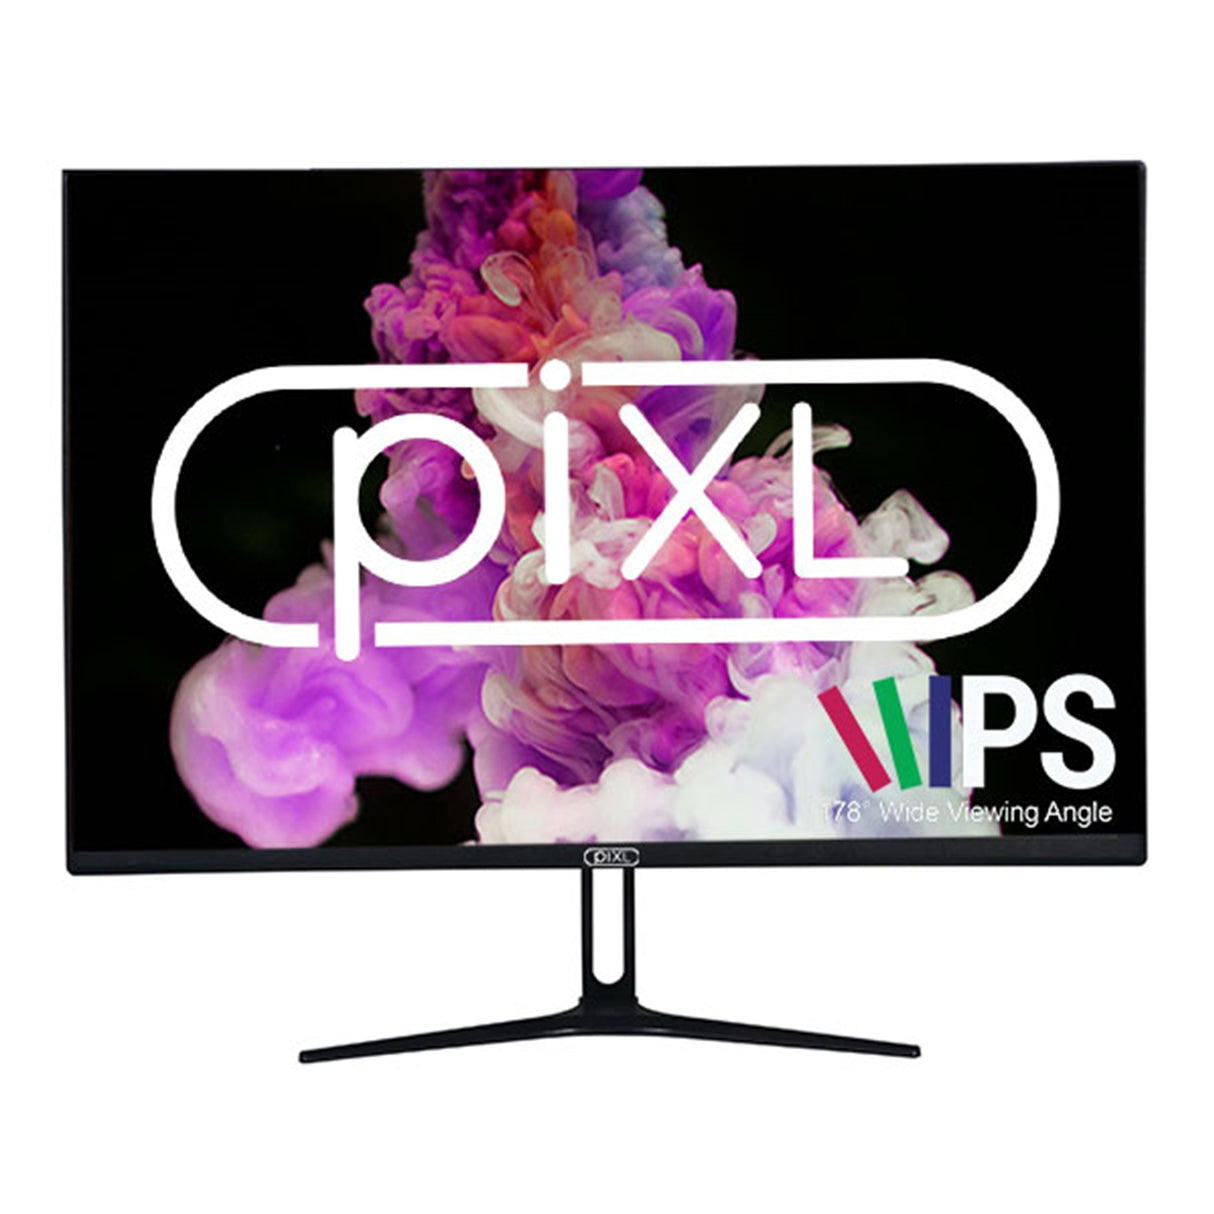 piXL PX24IVH 24 Inch Frameless Monitor, Widescreen IPS LCD Panel, 5ms Response Time, 75Hz Refresh Rate, Full HD 1920 x 1200, 16:10 Aspect Ratio, VGA / HDMI, 16.7 Million Colour Support, Black Finish